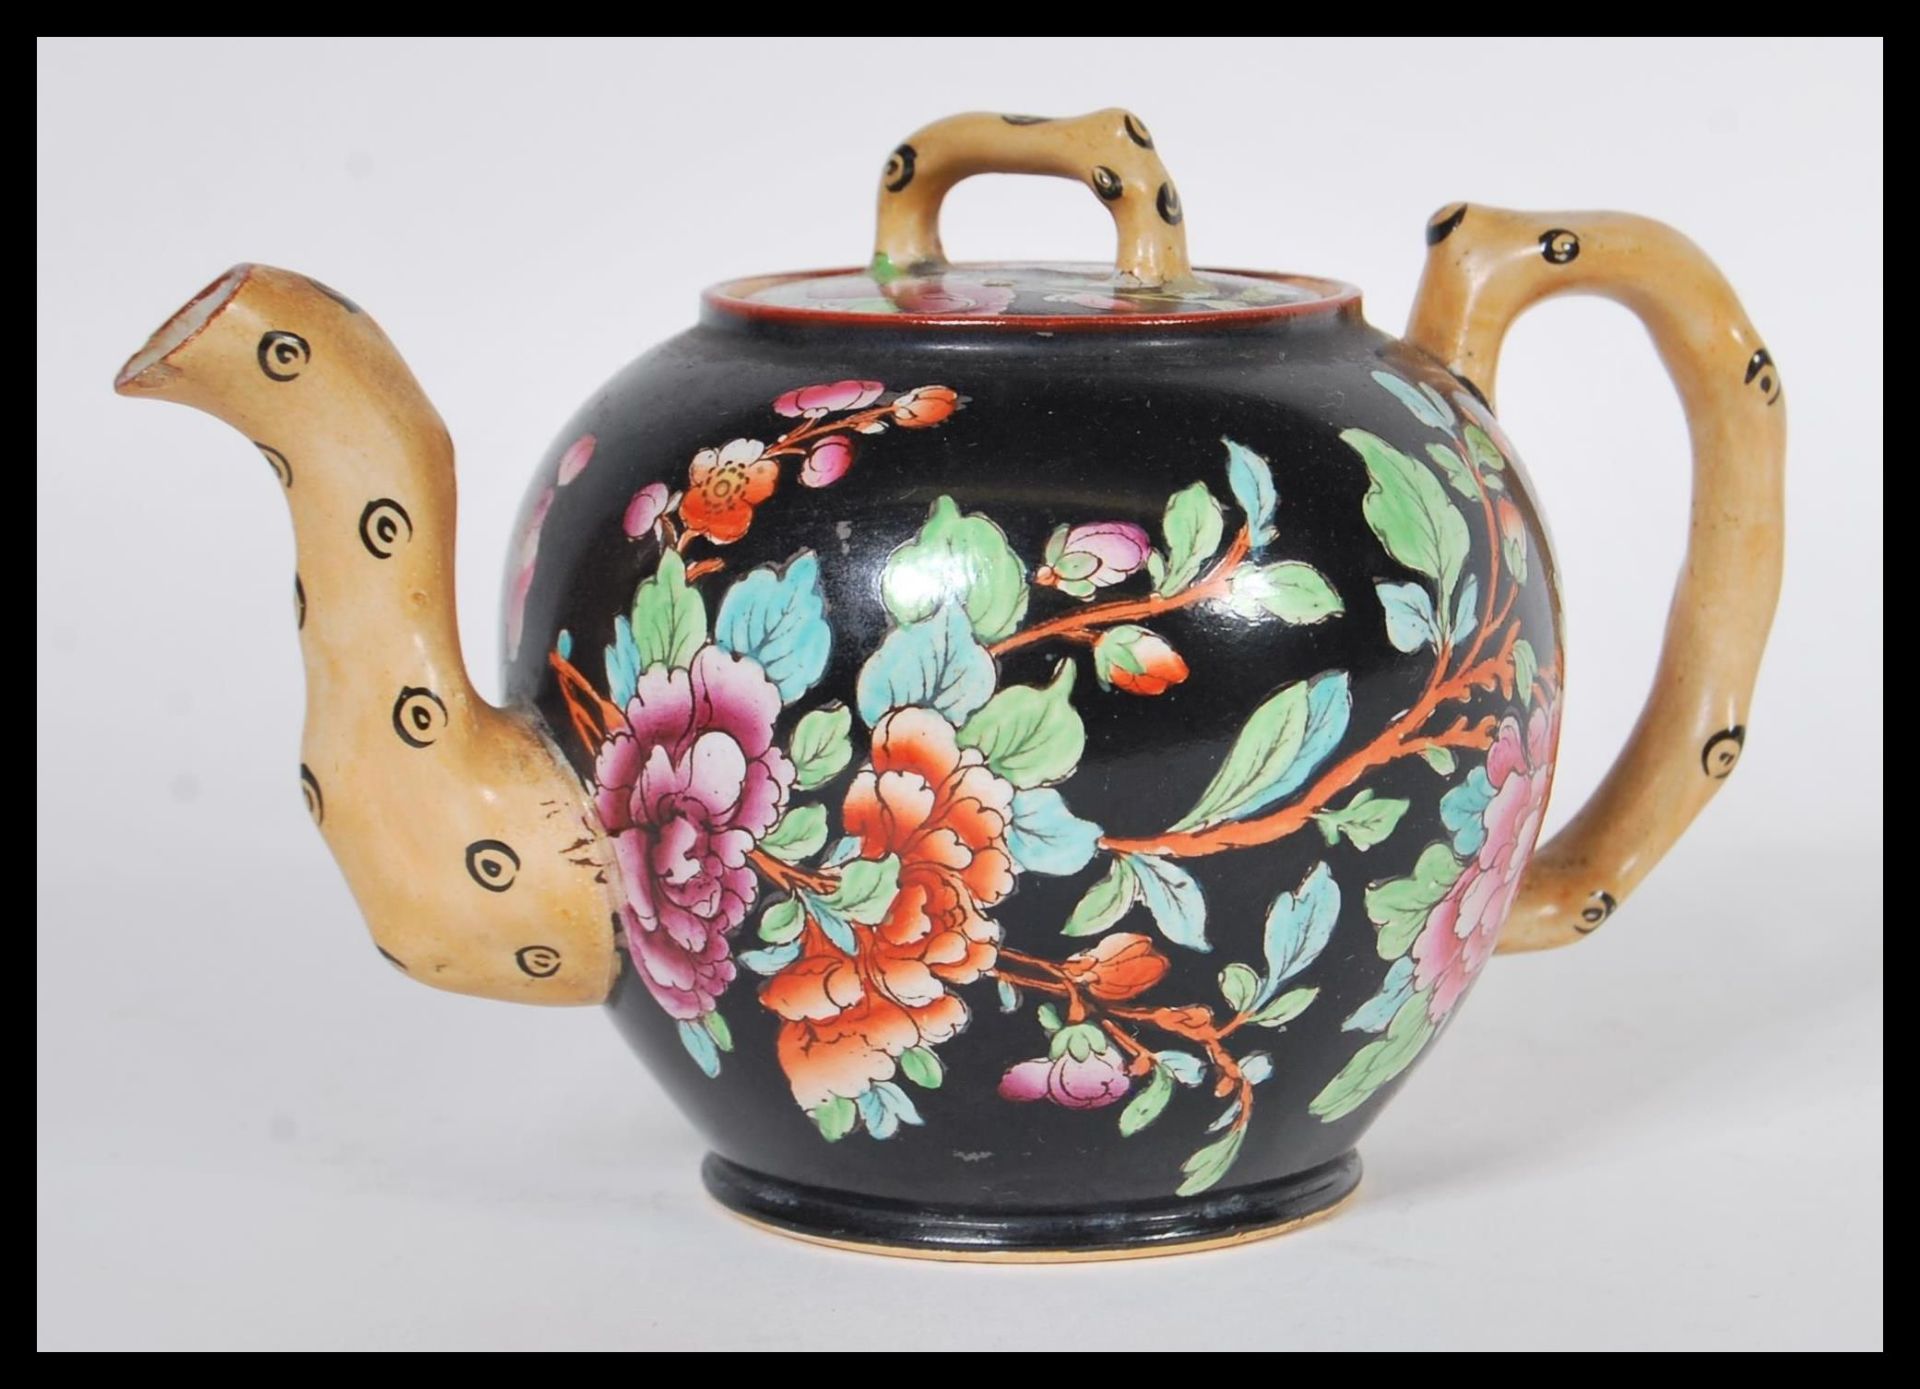 A 19th Century Victorian Wedgwood Etruria black basalt teapot having hand painted chinoiserie floral